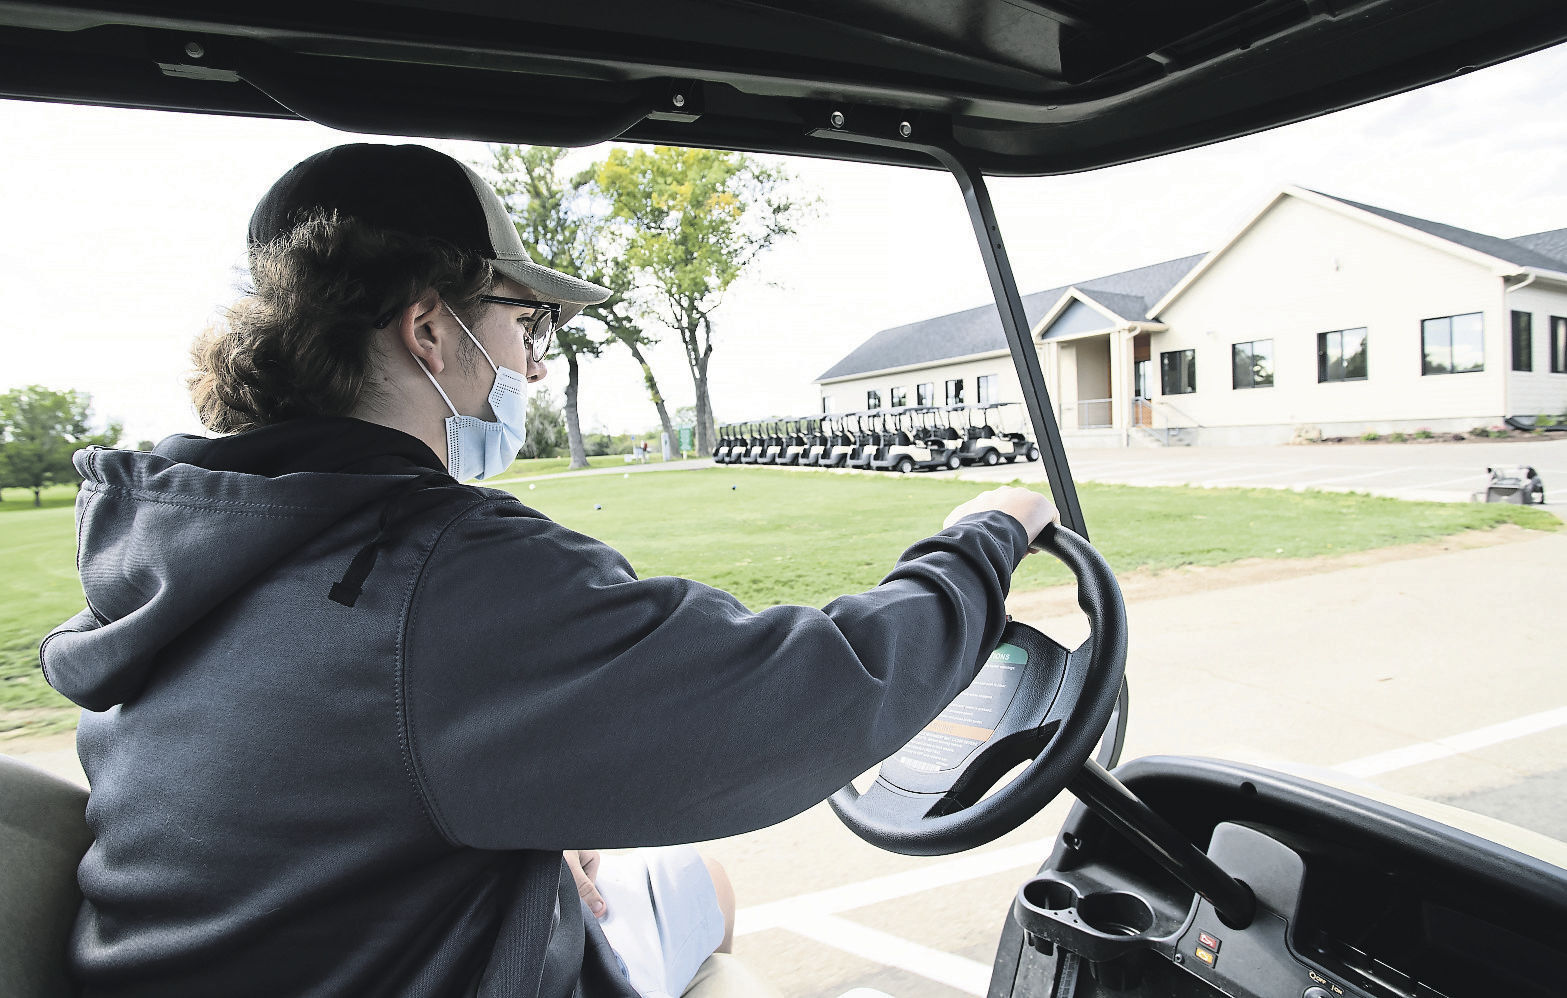 Zak McElmeel, a student at Dubuque Senior, stages carts at Lacoma Golf Course in East Dubuque, Ill., on Wednesday.    PHOTO CREDIT: Stephen Gassman